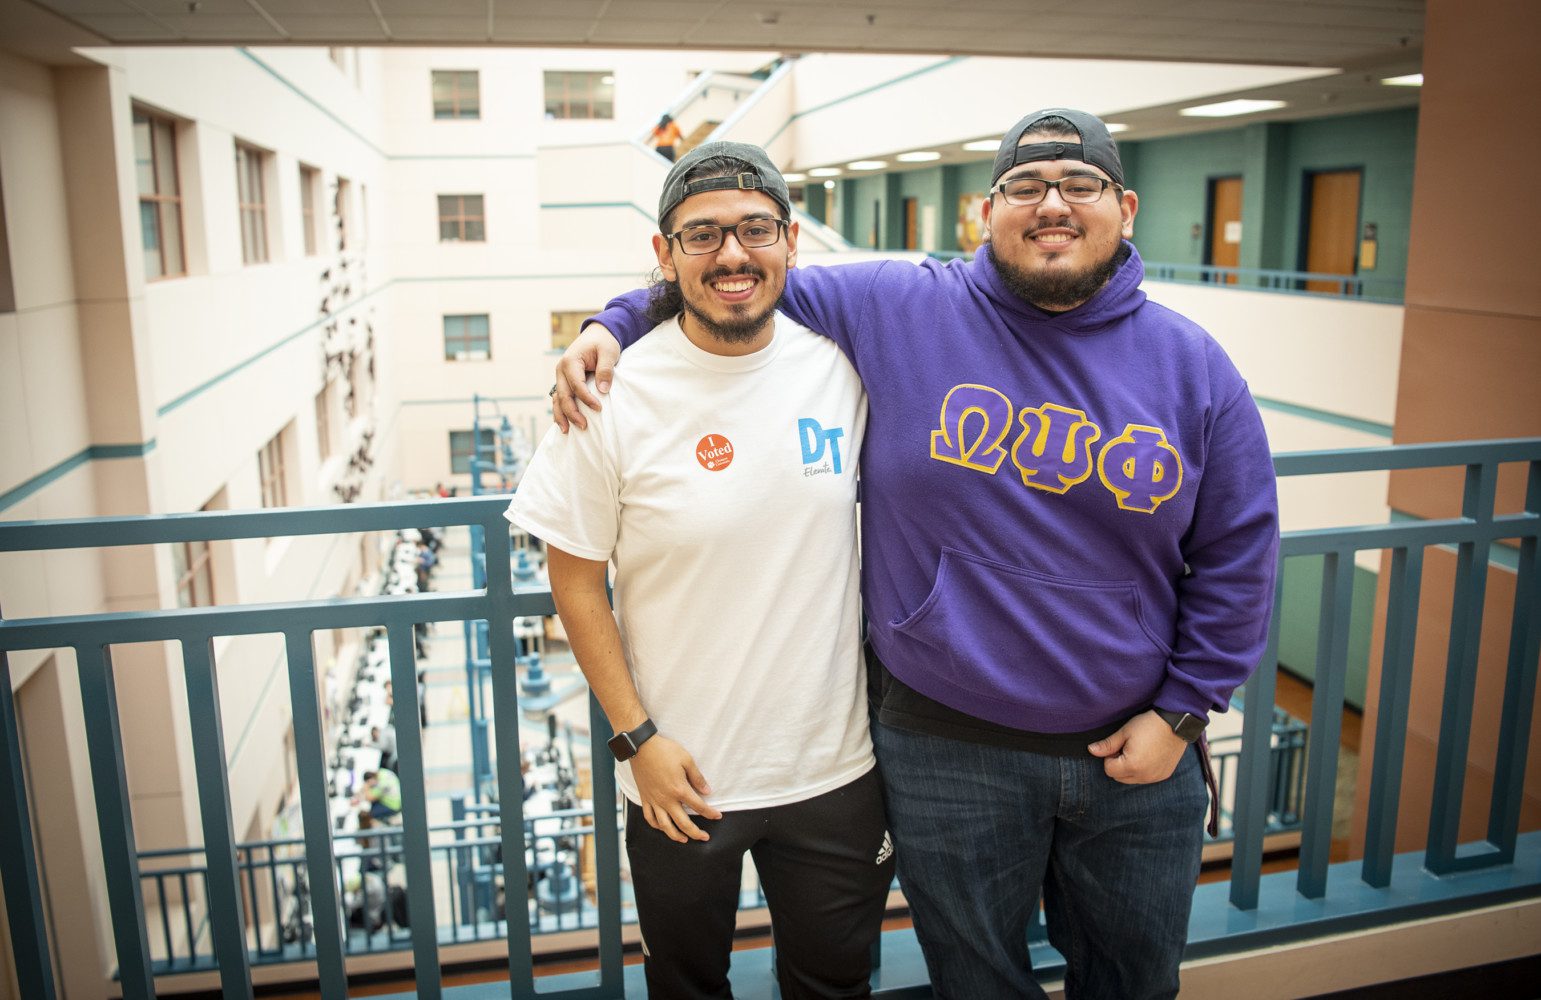 Two Hispanic-American brothers, each wearing glasses and backward baseball caps, pose with their arms around each other